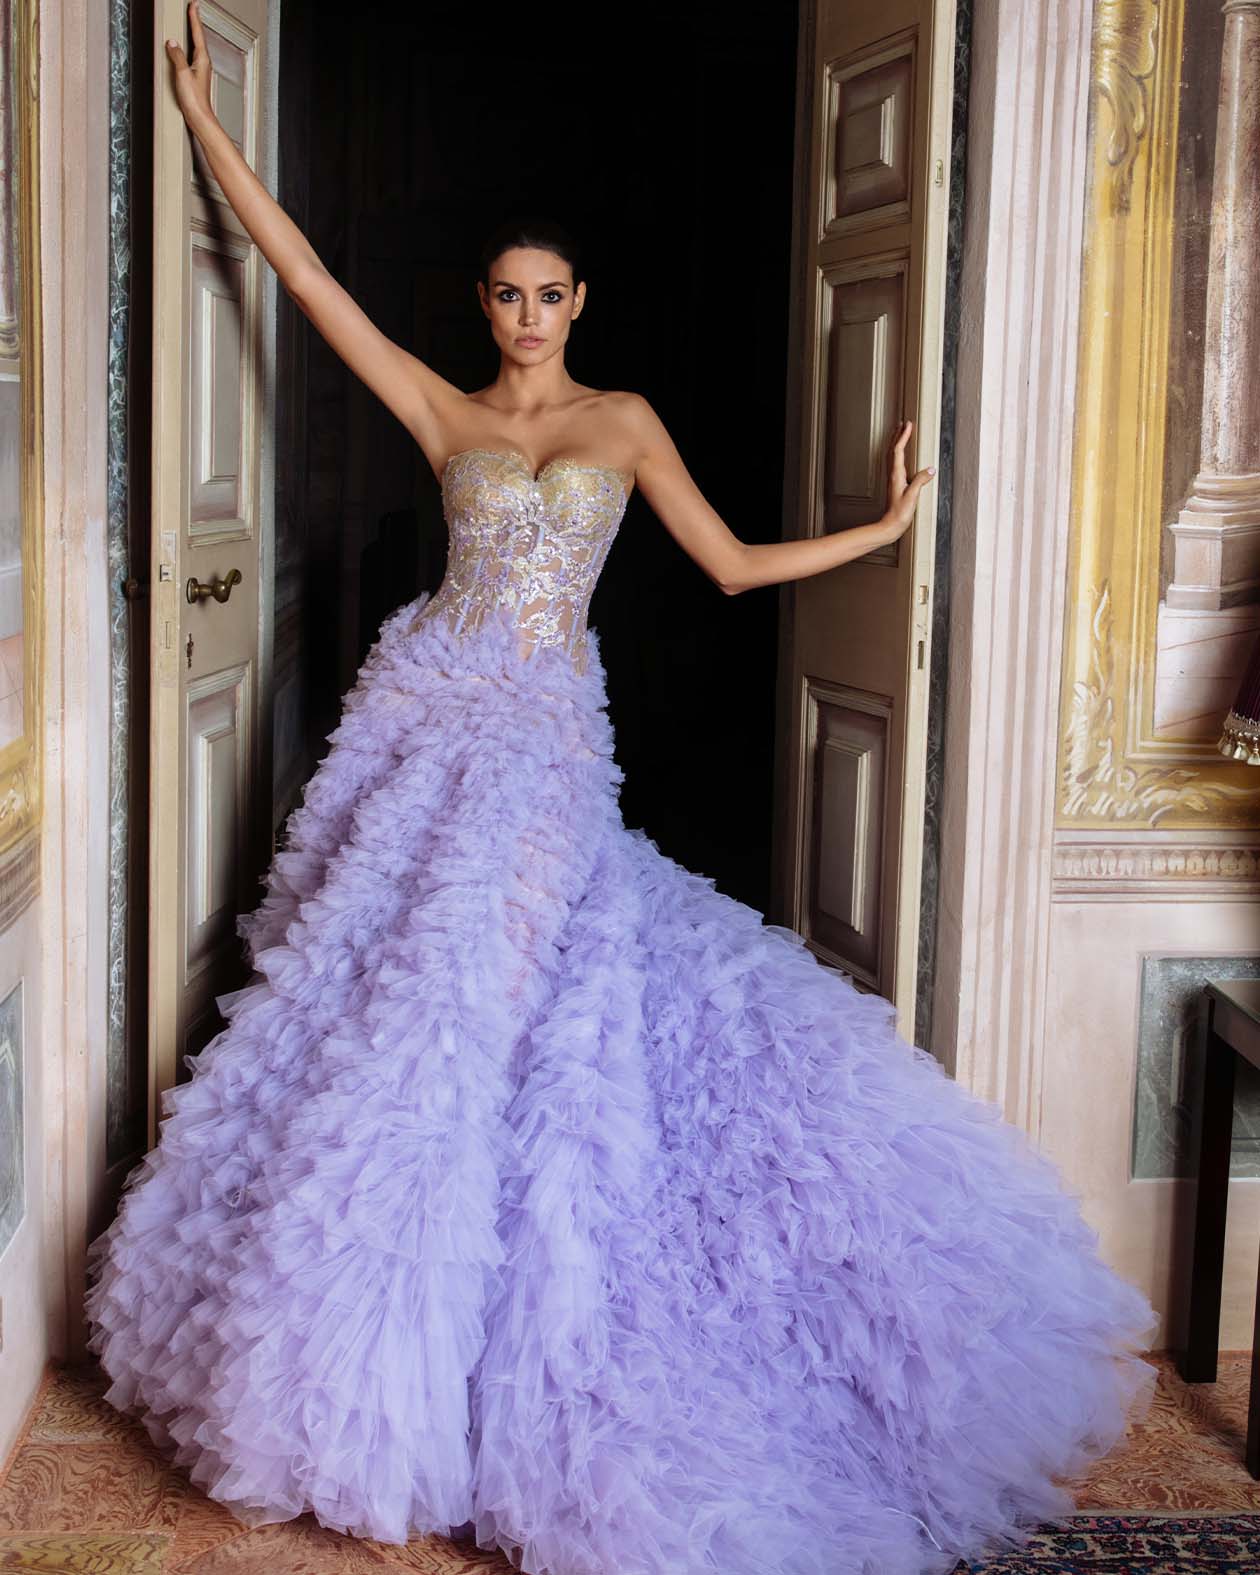 Embellished lilac gown